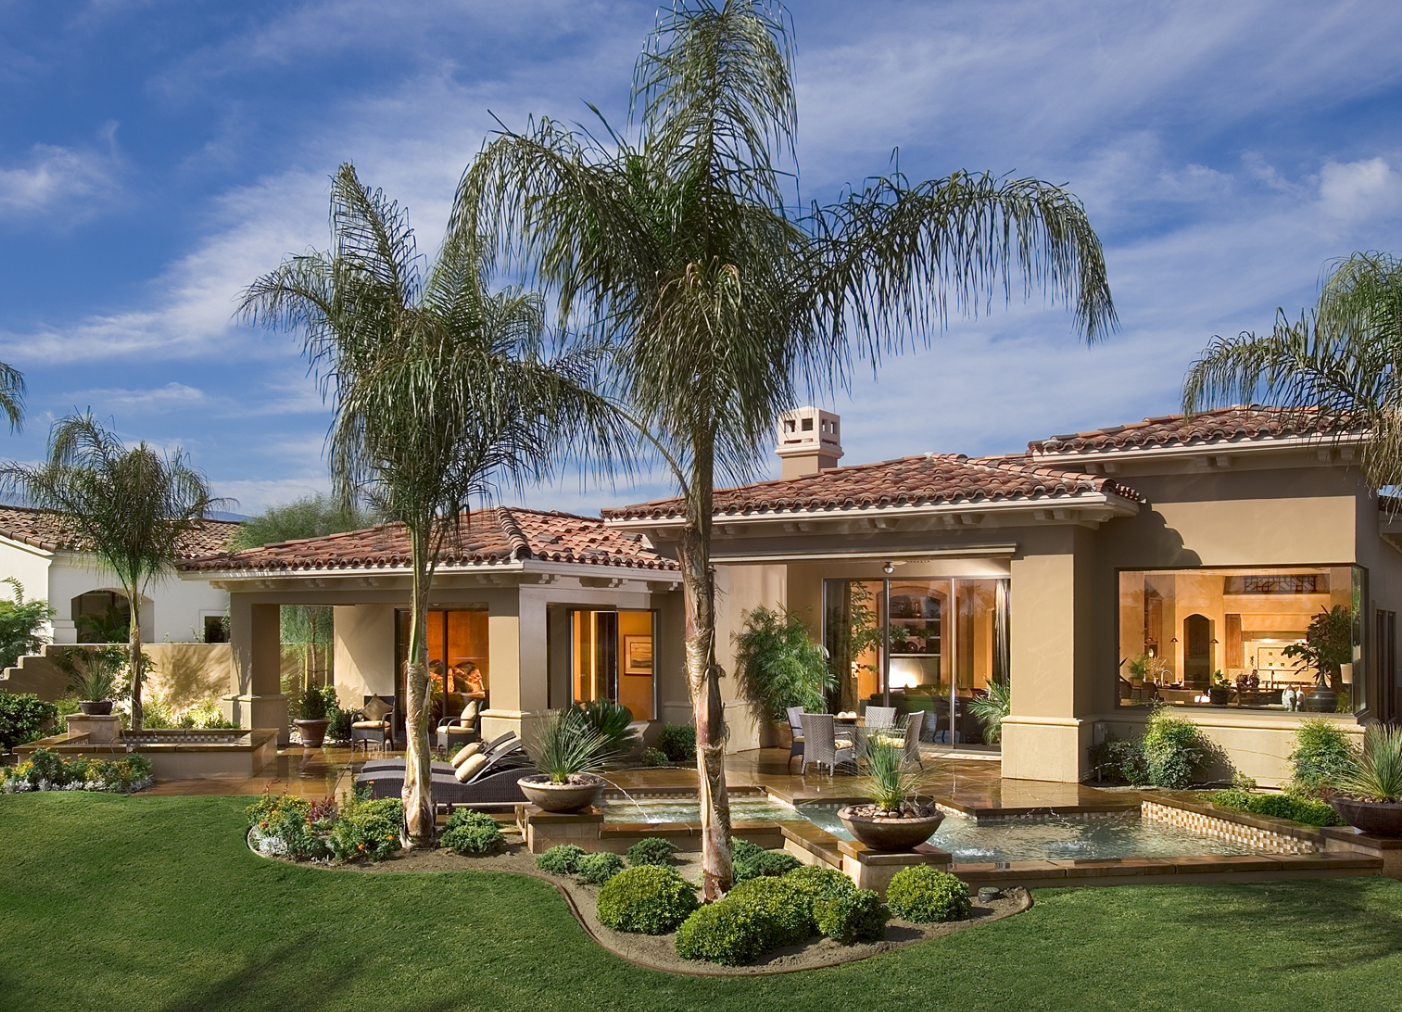 In addition to increasing curb appeal, modern tile roofing systems and accessories offer an opportunity to improve the energy efficiency of a home.